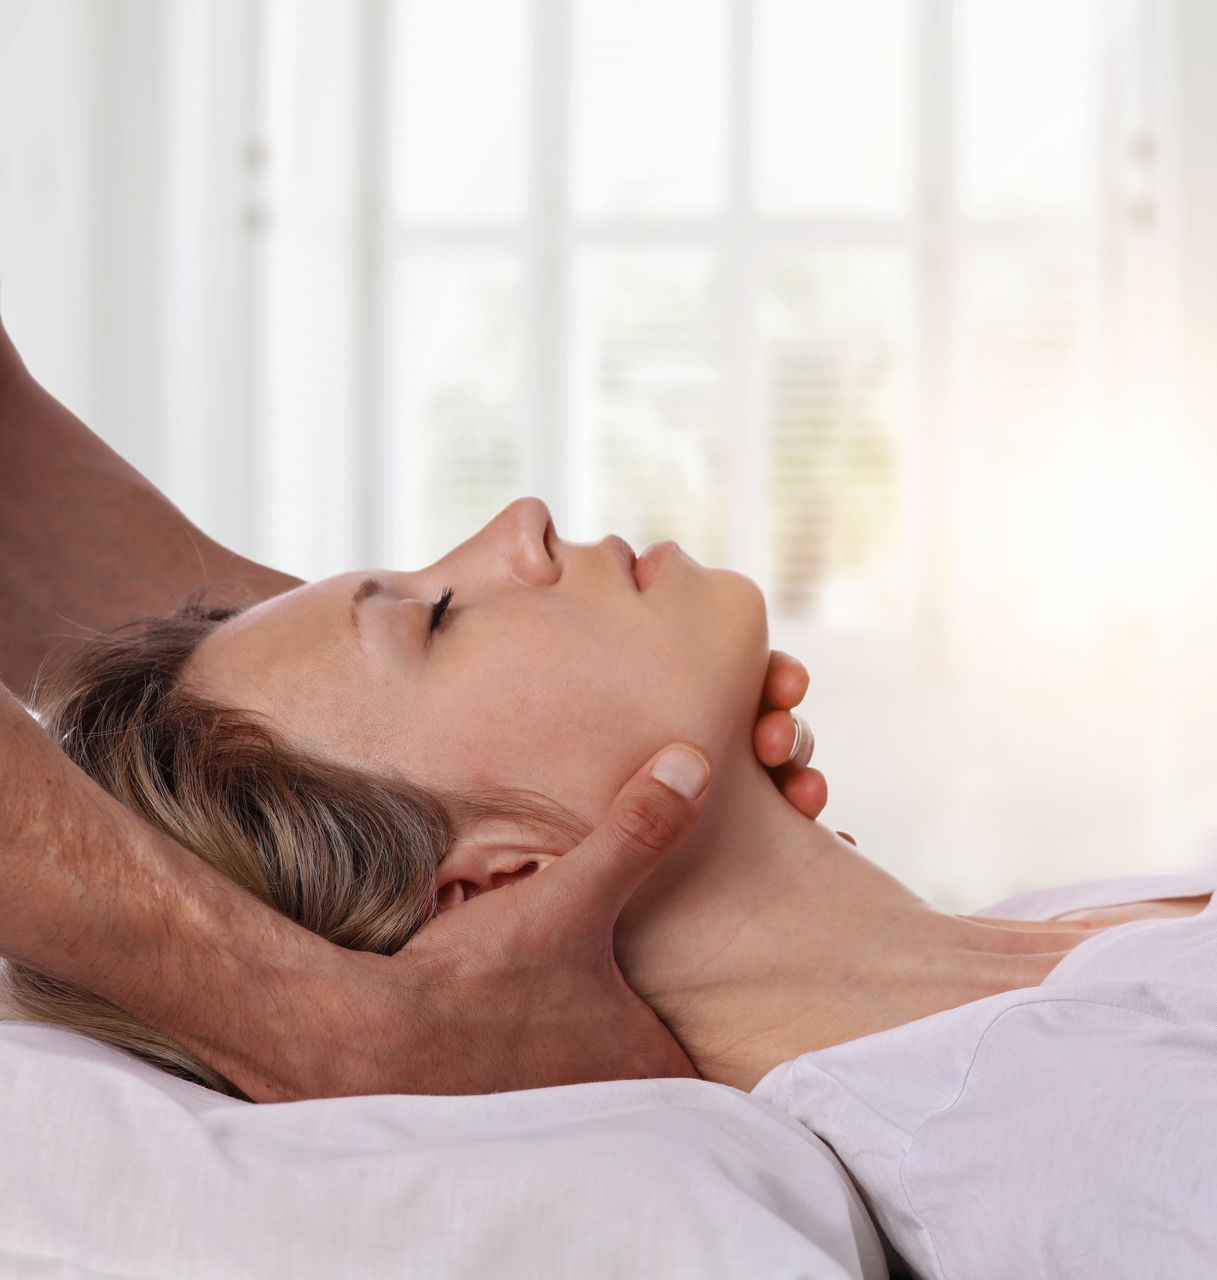 A woman is laying on a bed getting a massage from a man.